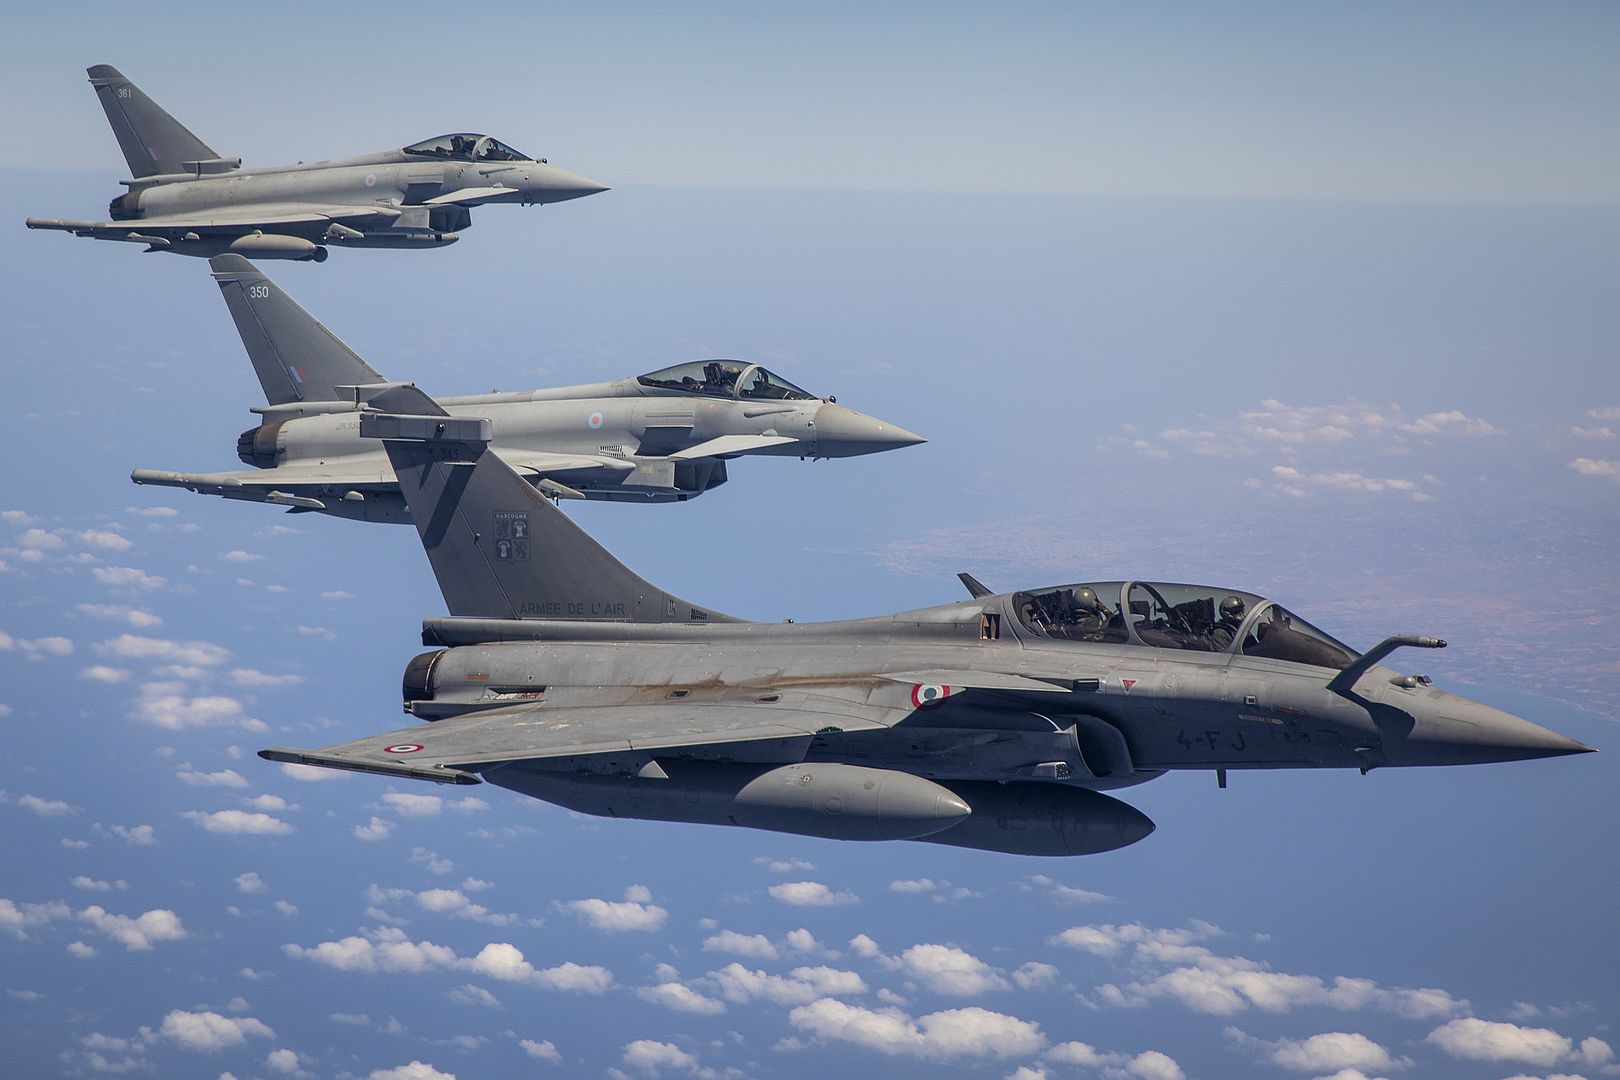 Typhoons Have Been Conducting Combat Air Training With Rafale Fighter Jets From The French Air And Space Force